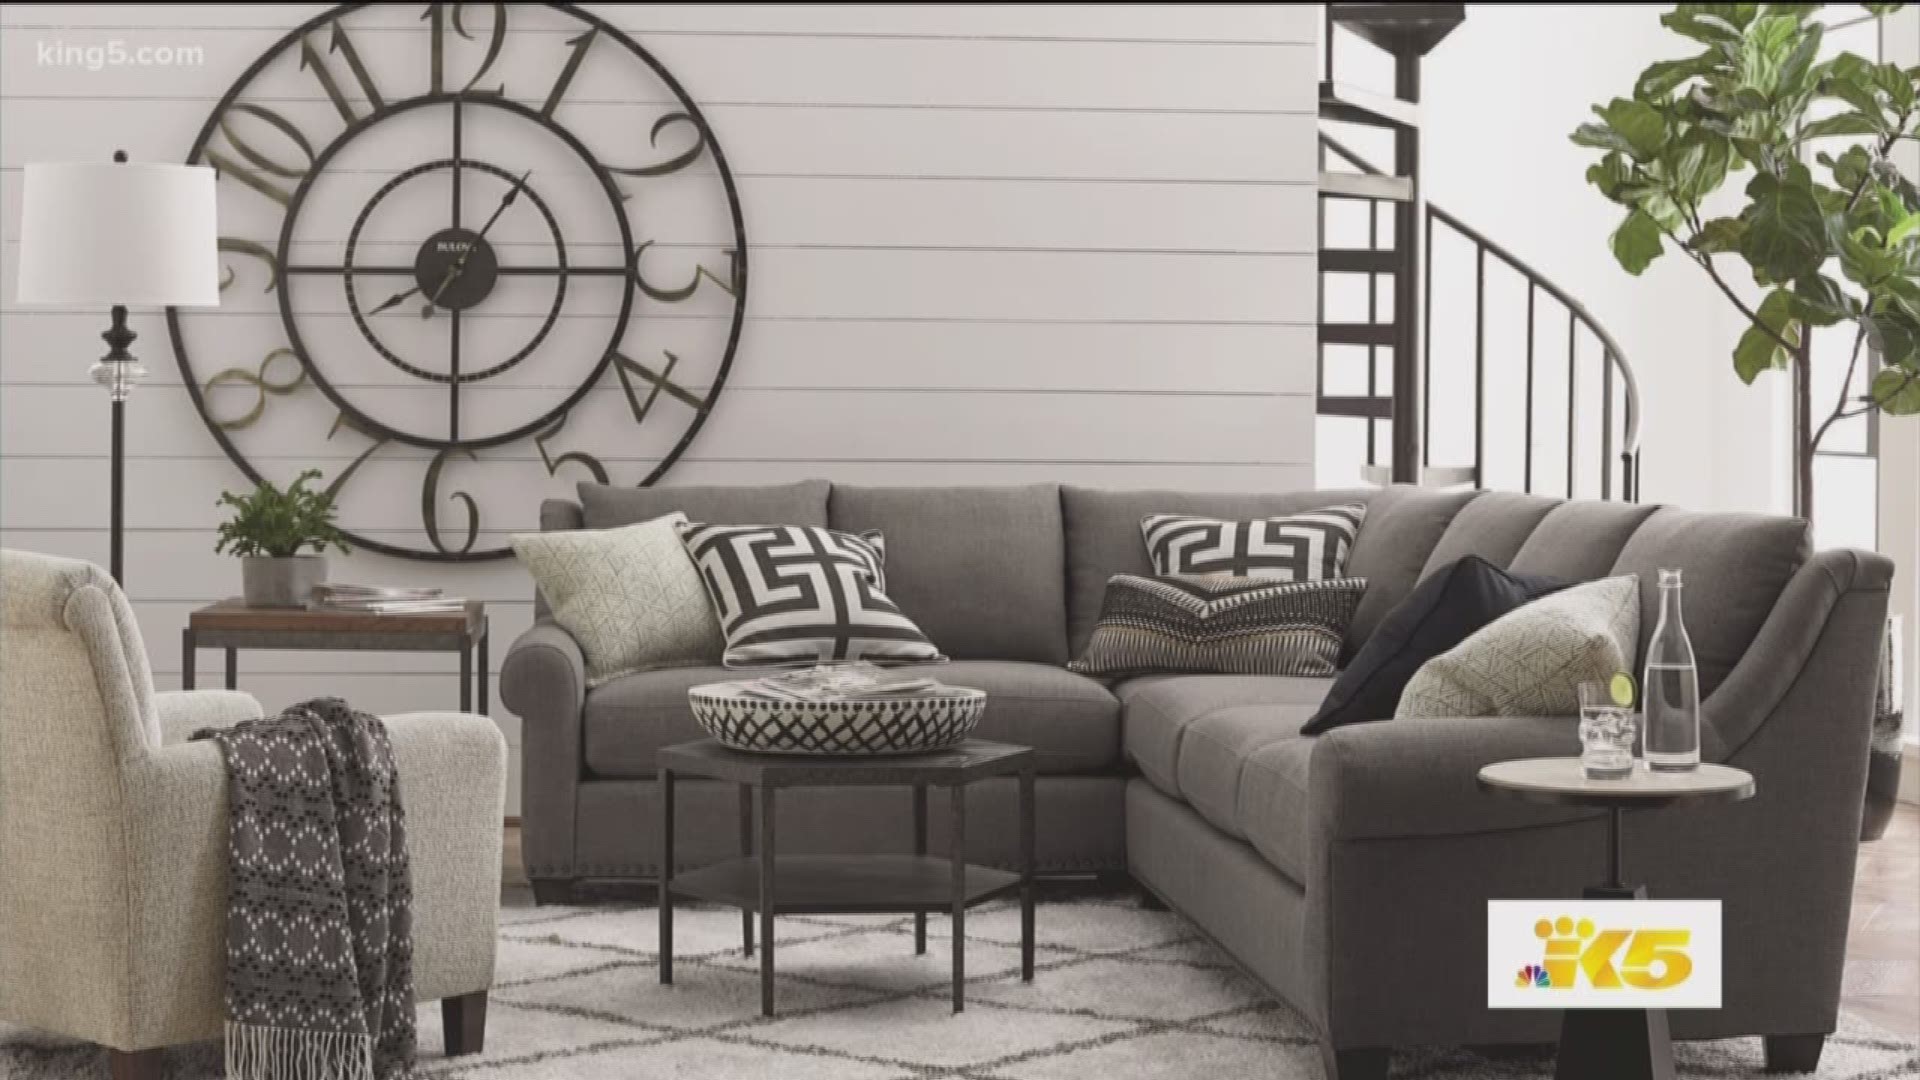 Bassett Furniture Showcases American Casual Style For New Day Set King5 Com